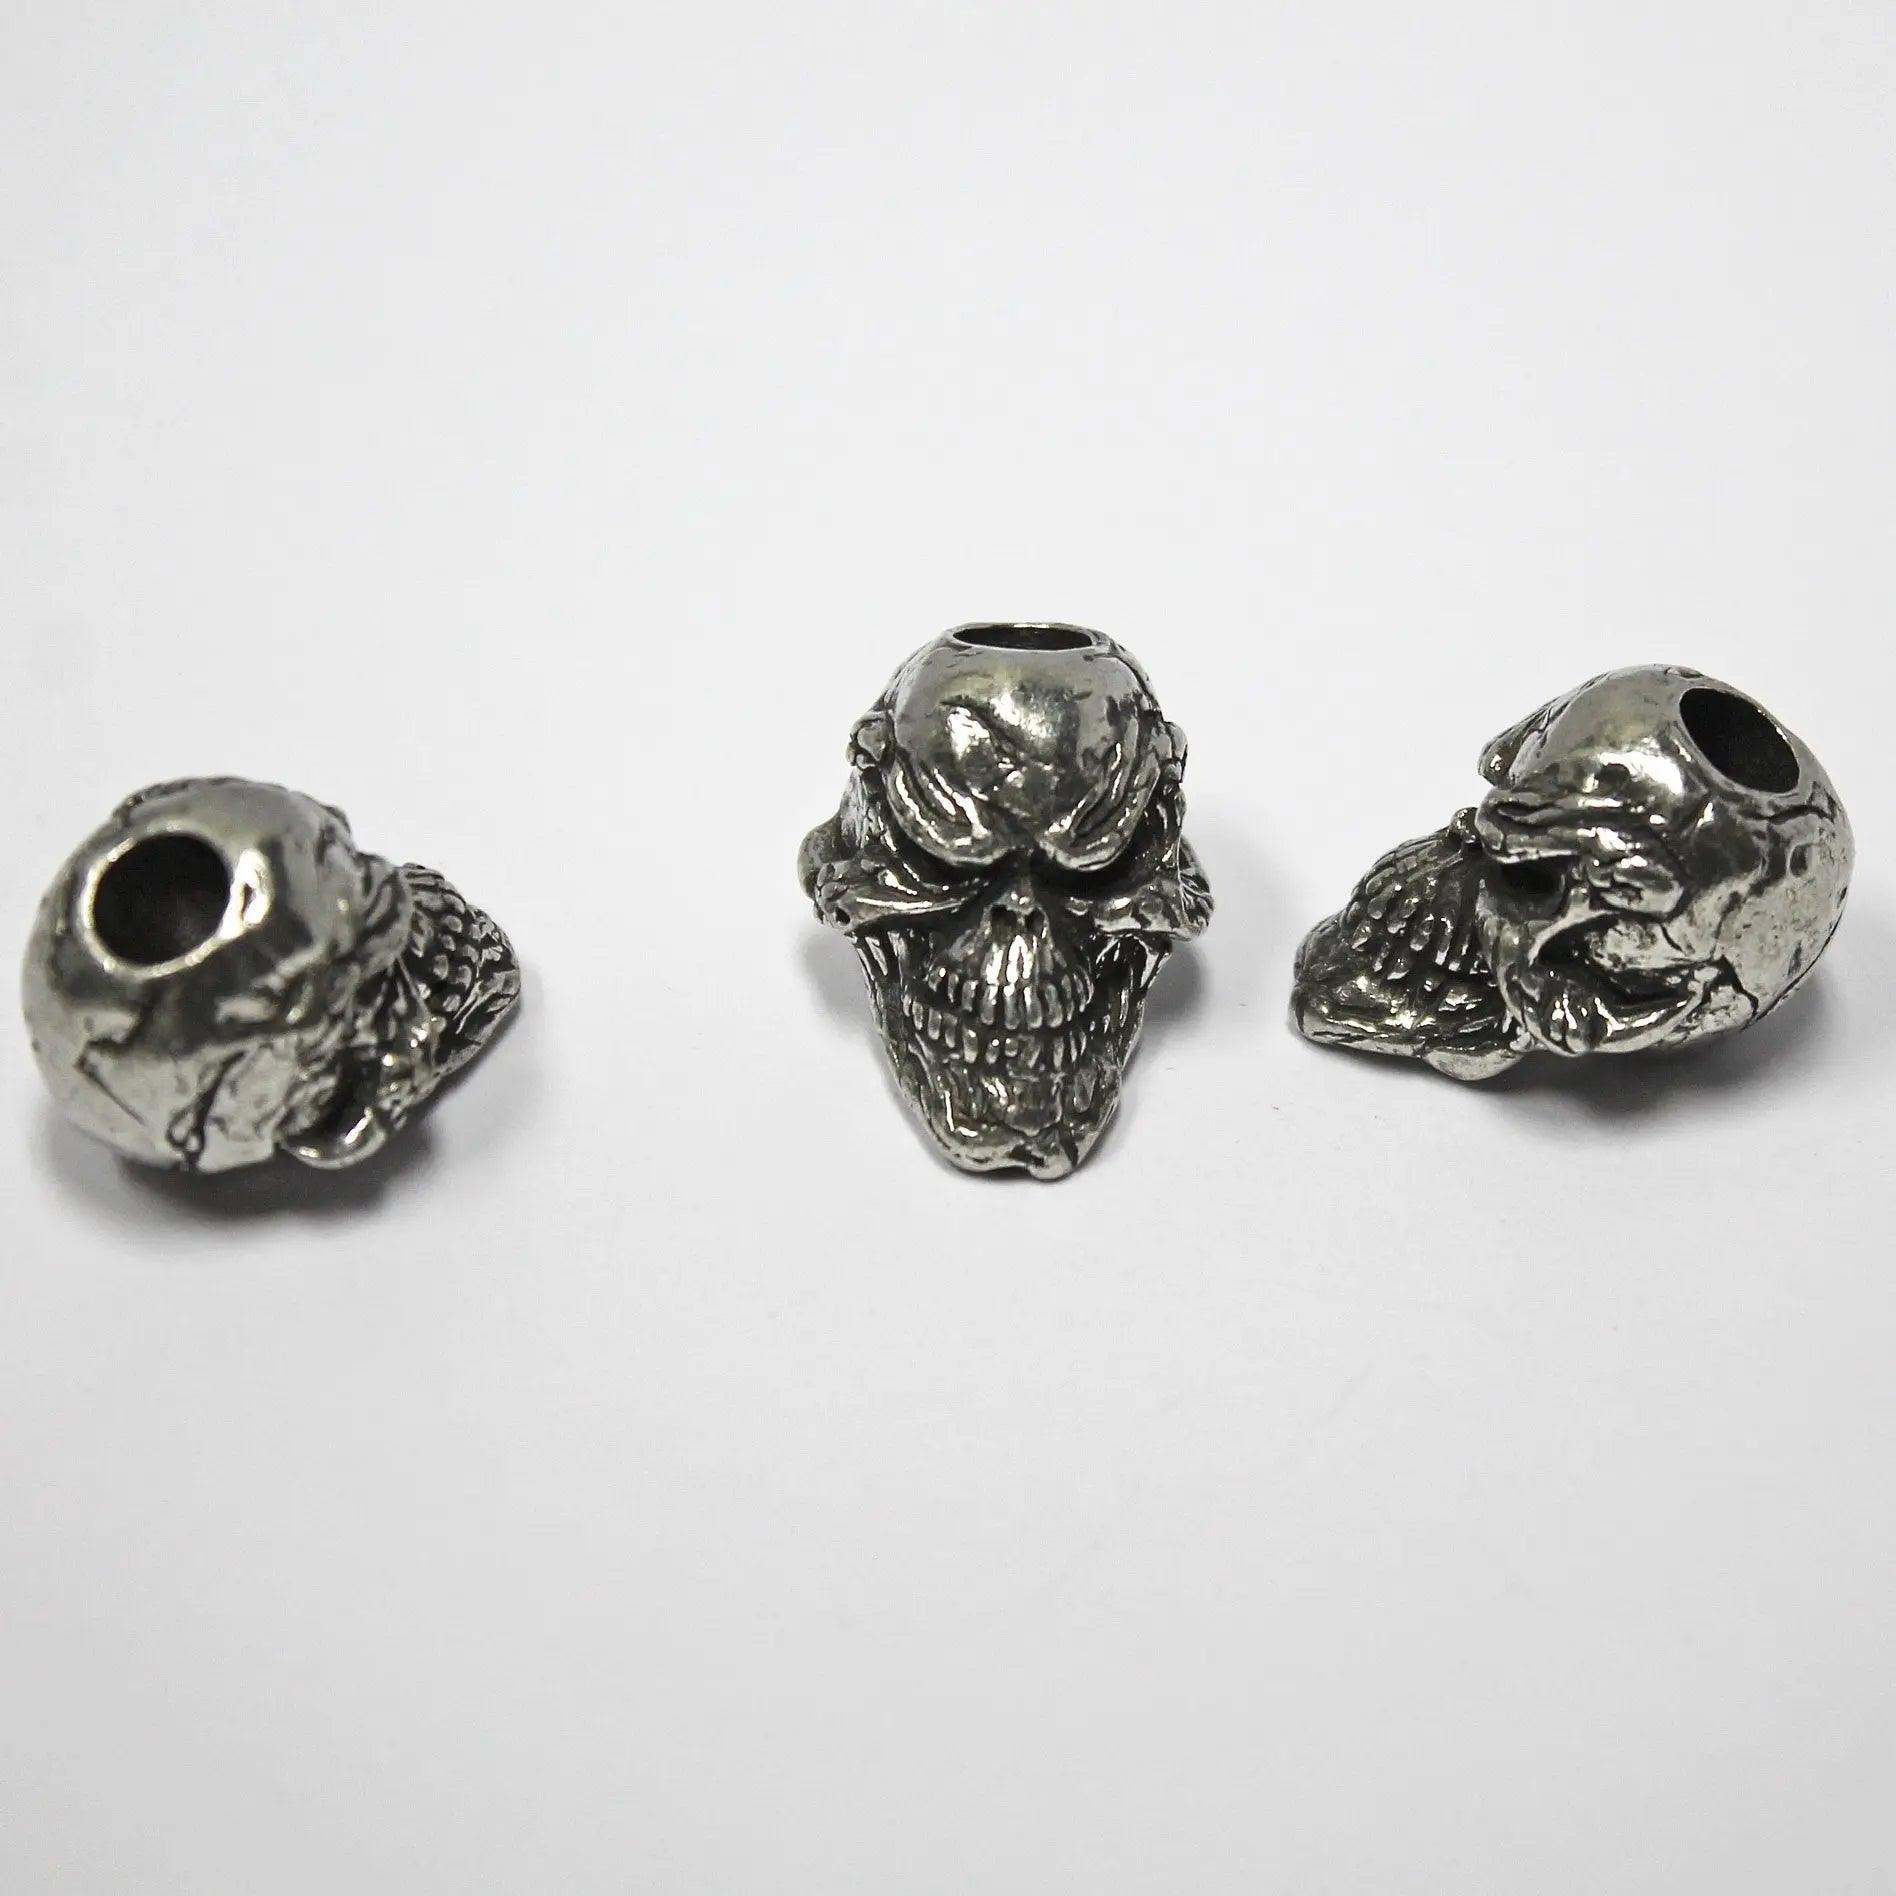 Schmuckatelli Pewter Grins Skull Bead USA Made (1 Pack) - Paracord Galaxy